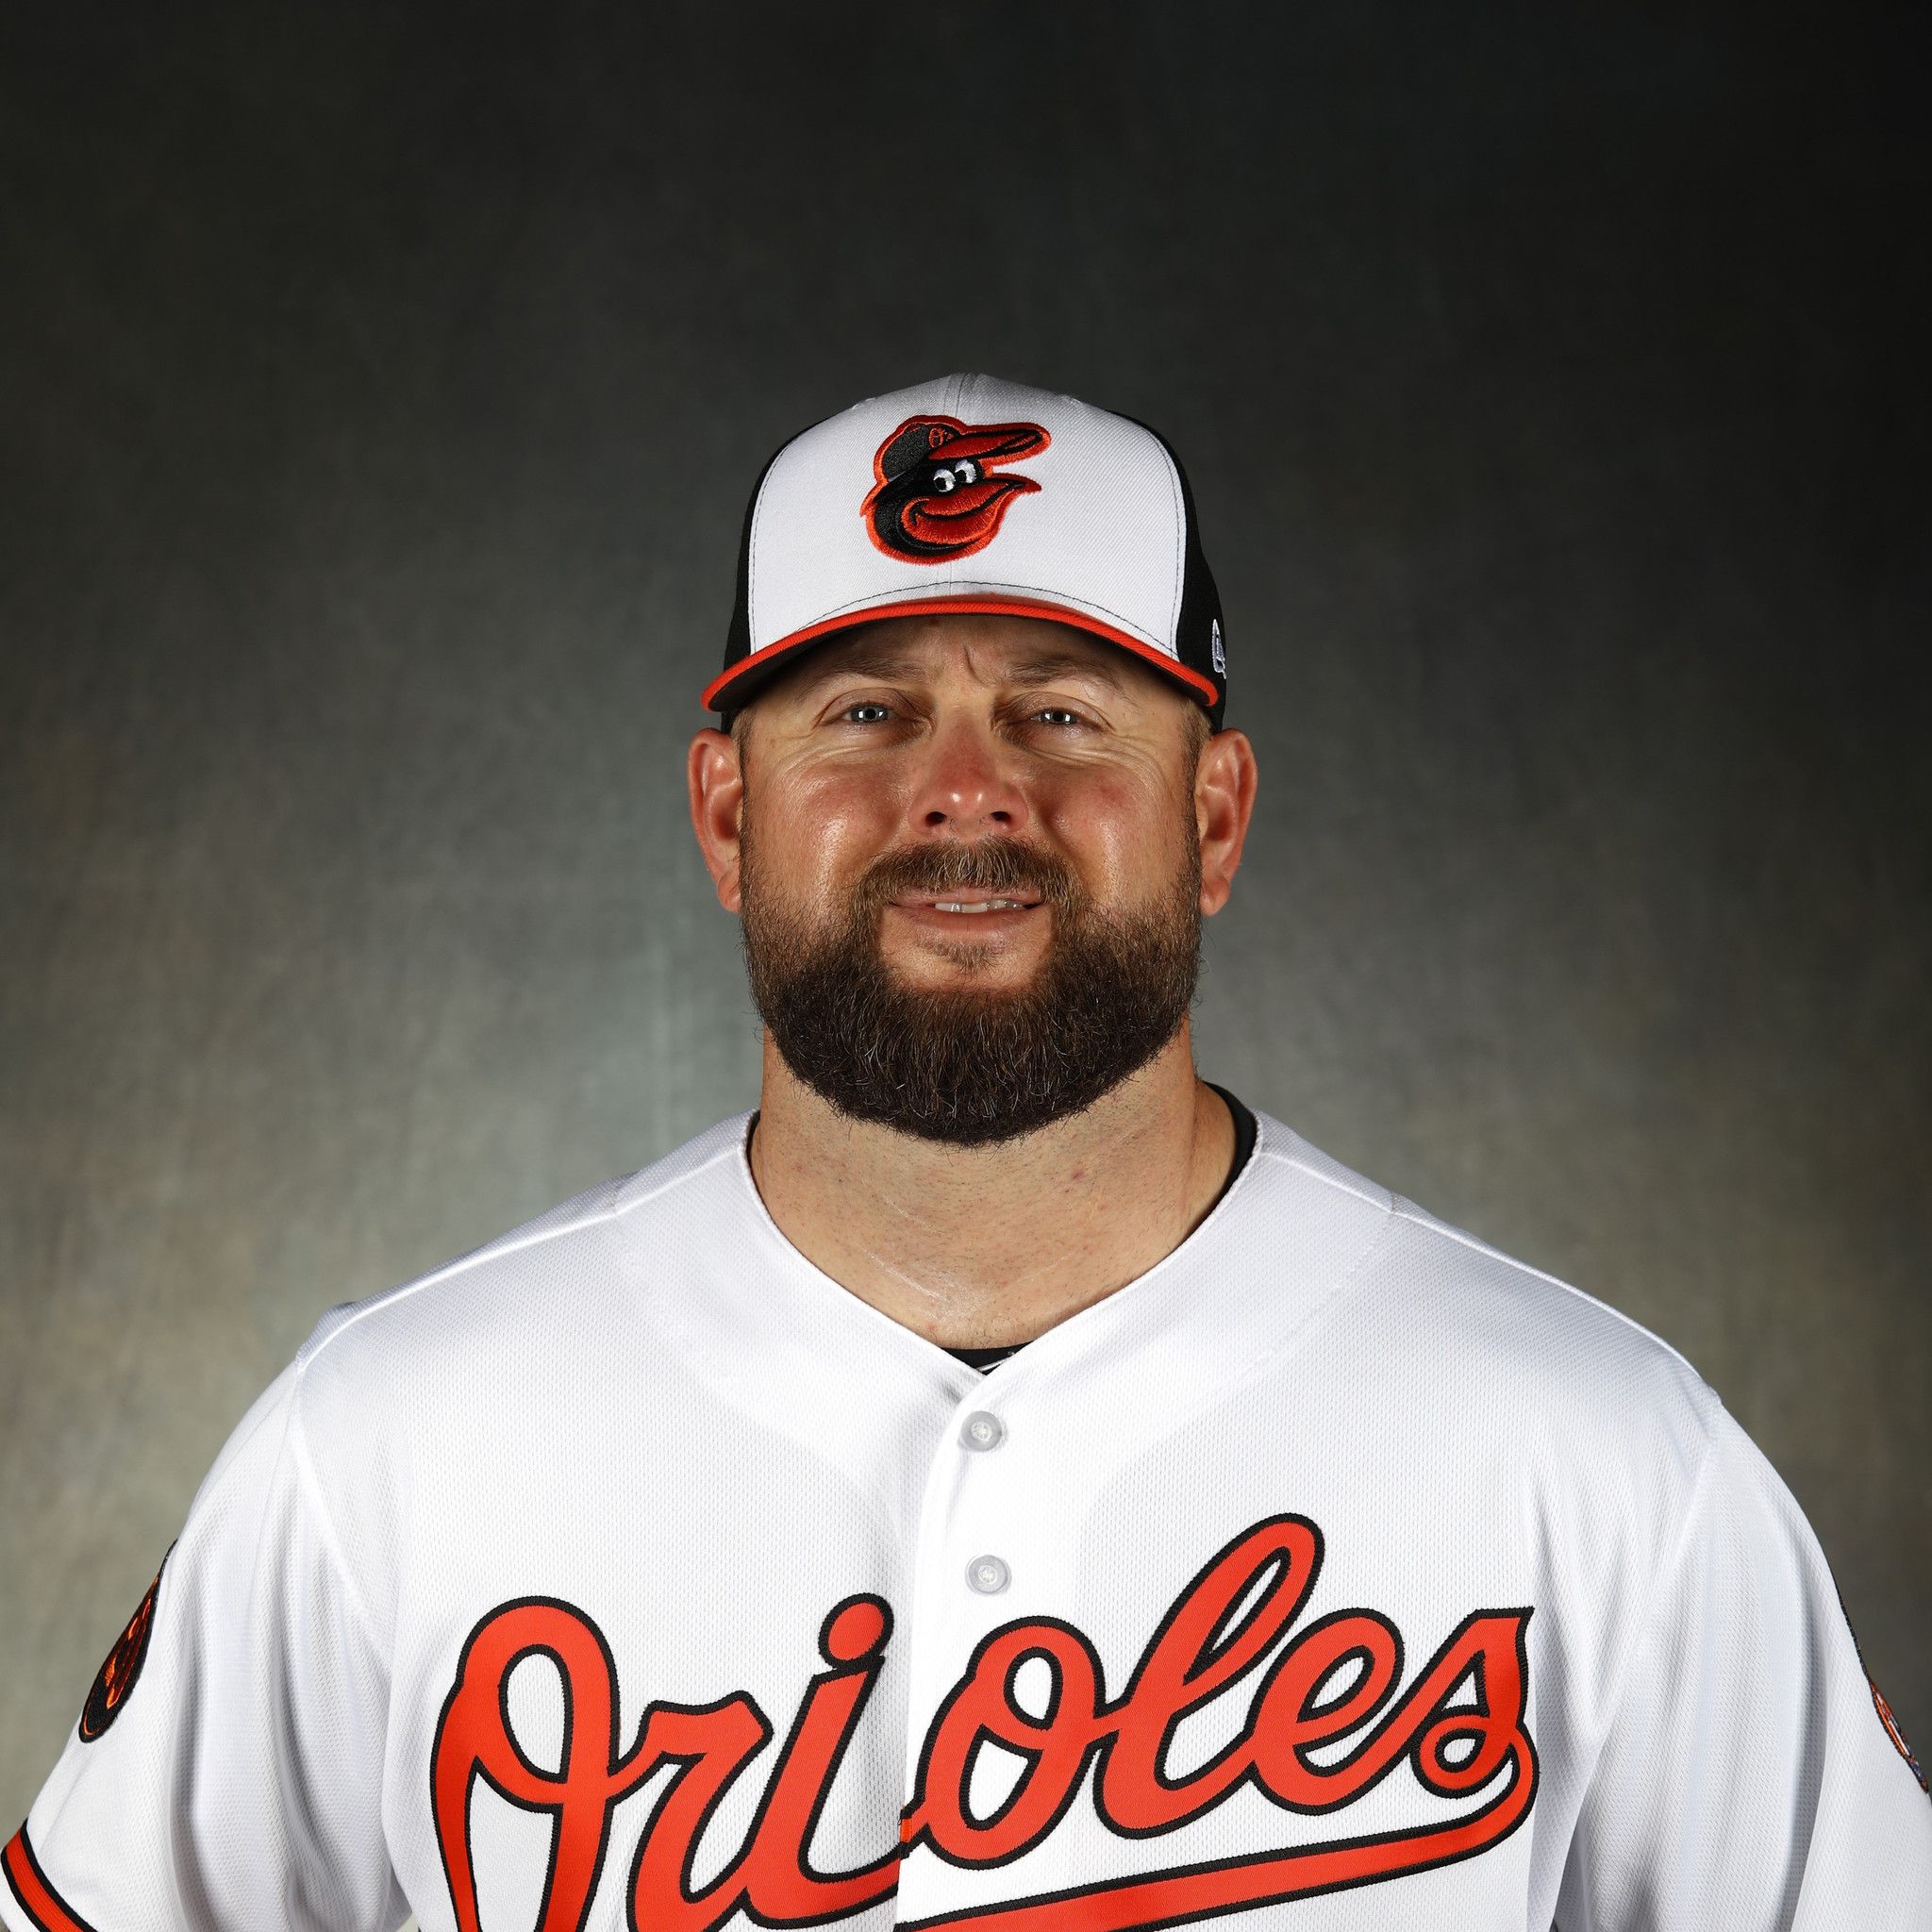 Pitching coach Chris Holt of the Baltimore Orioles talks to his